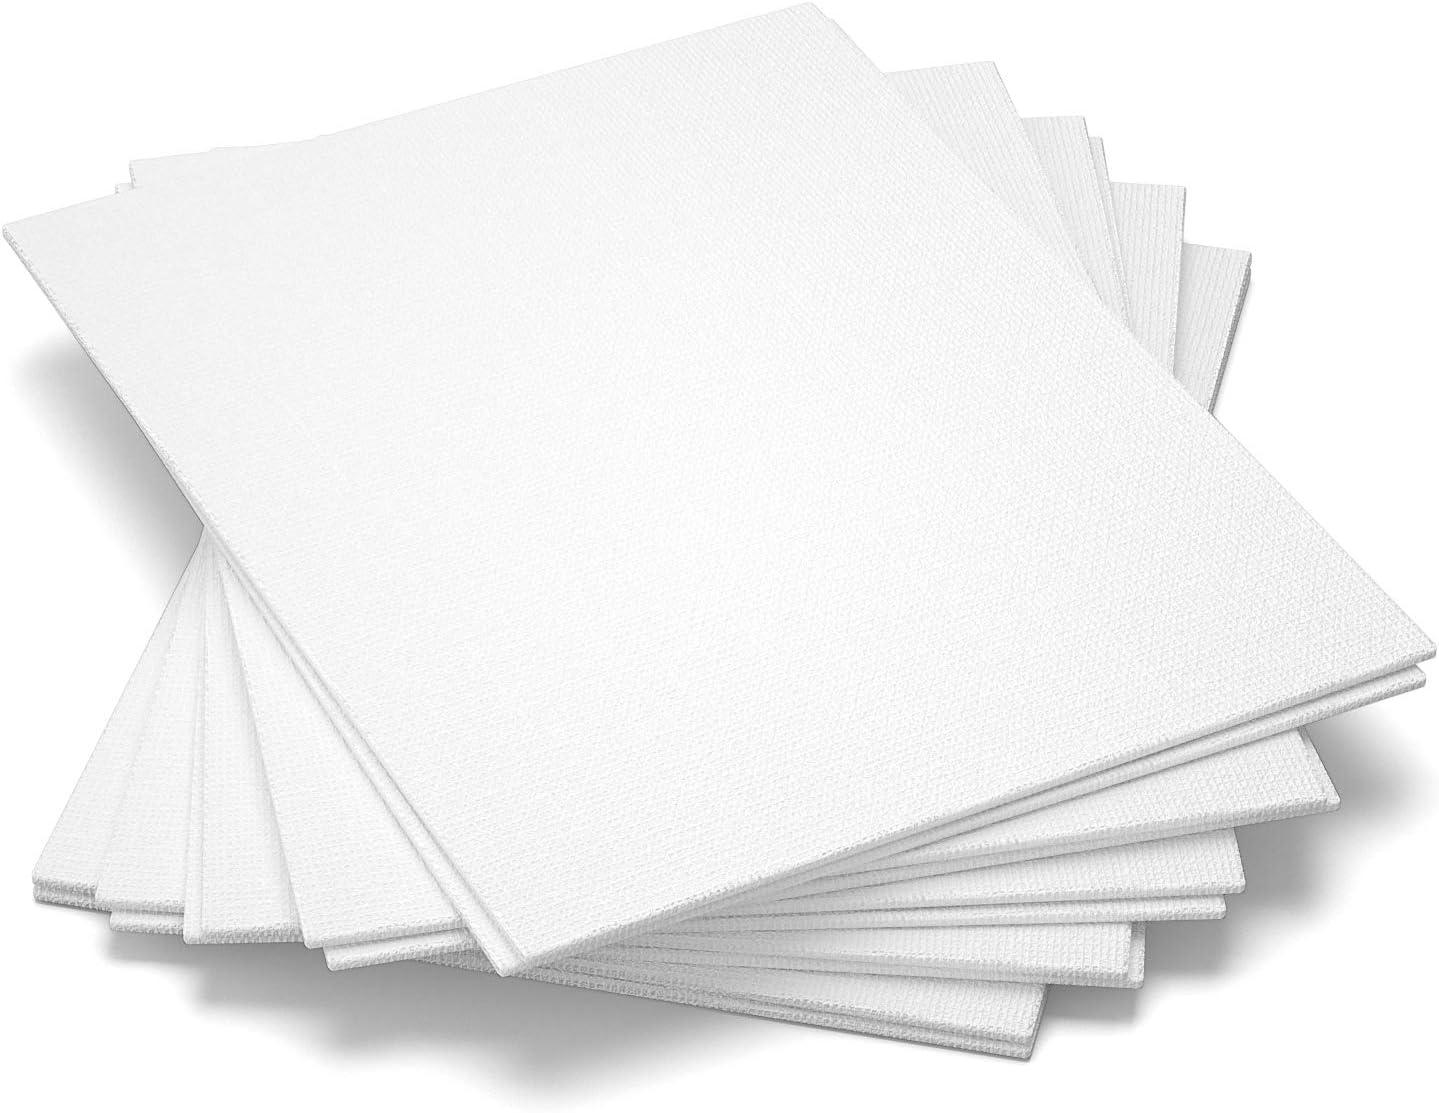 10 Pack Canvas Set - White Canvas for Artist - Panel Canvas Board - Blank  Stretched Canvas for Acrylic Painting - Water Painting Board